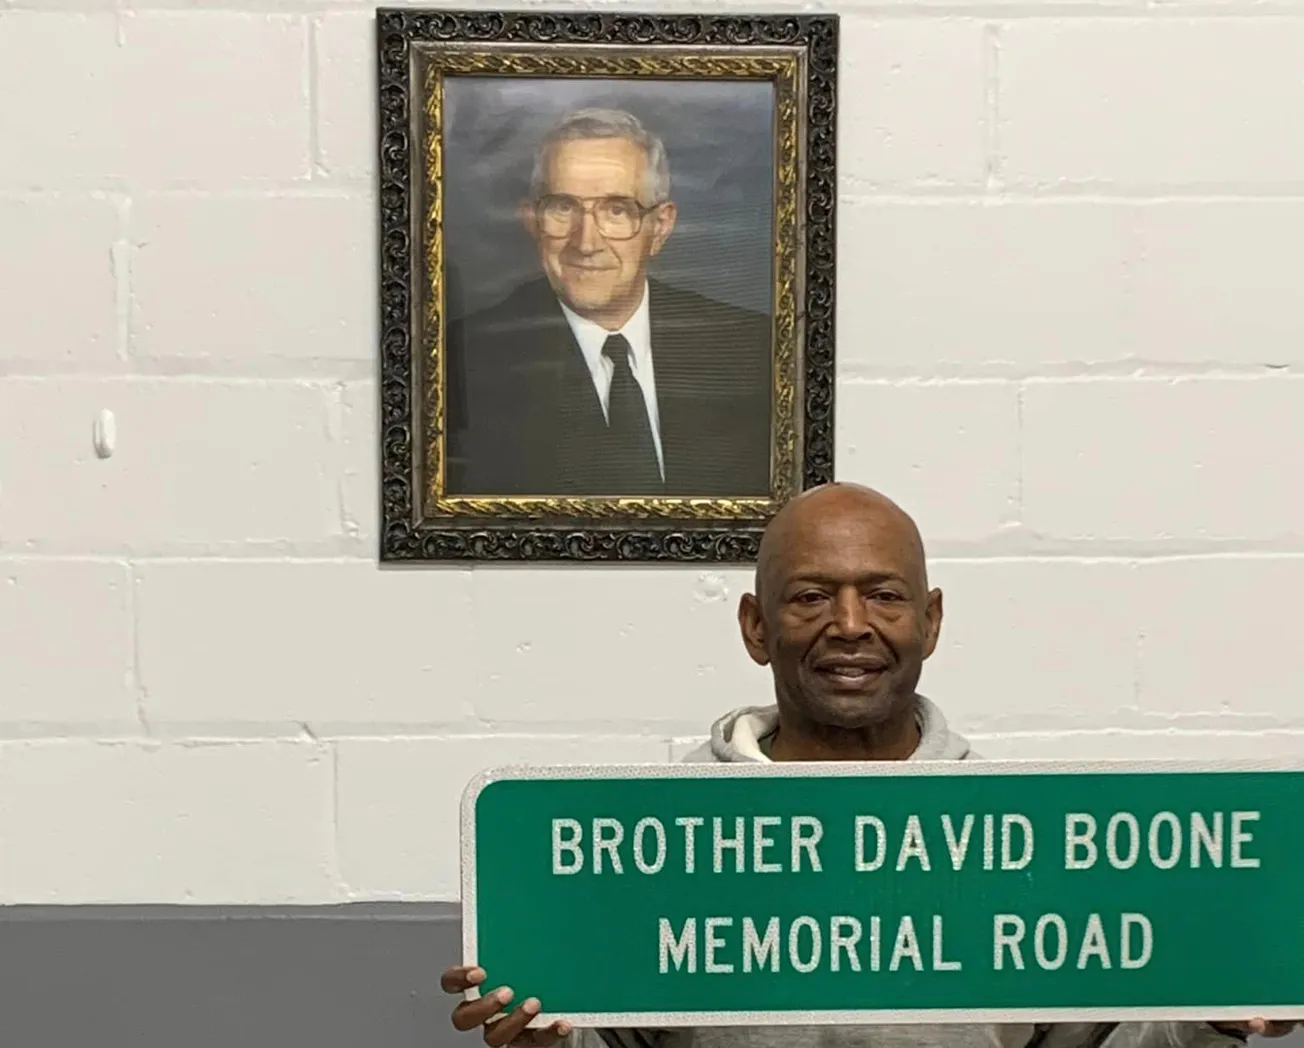 Br David Boone, longtime S.C. civil rights activist, honored with street renaming in Rock Hill